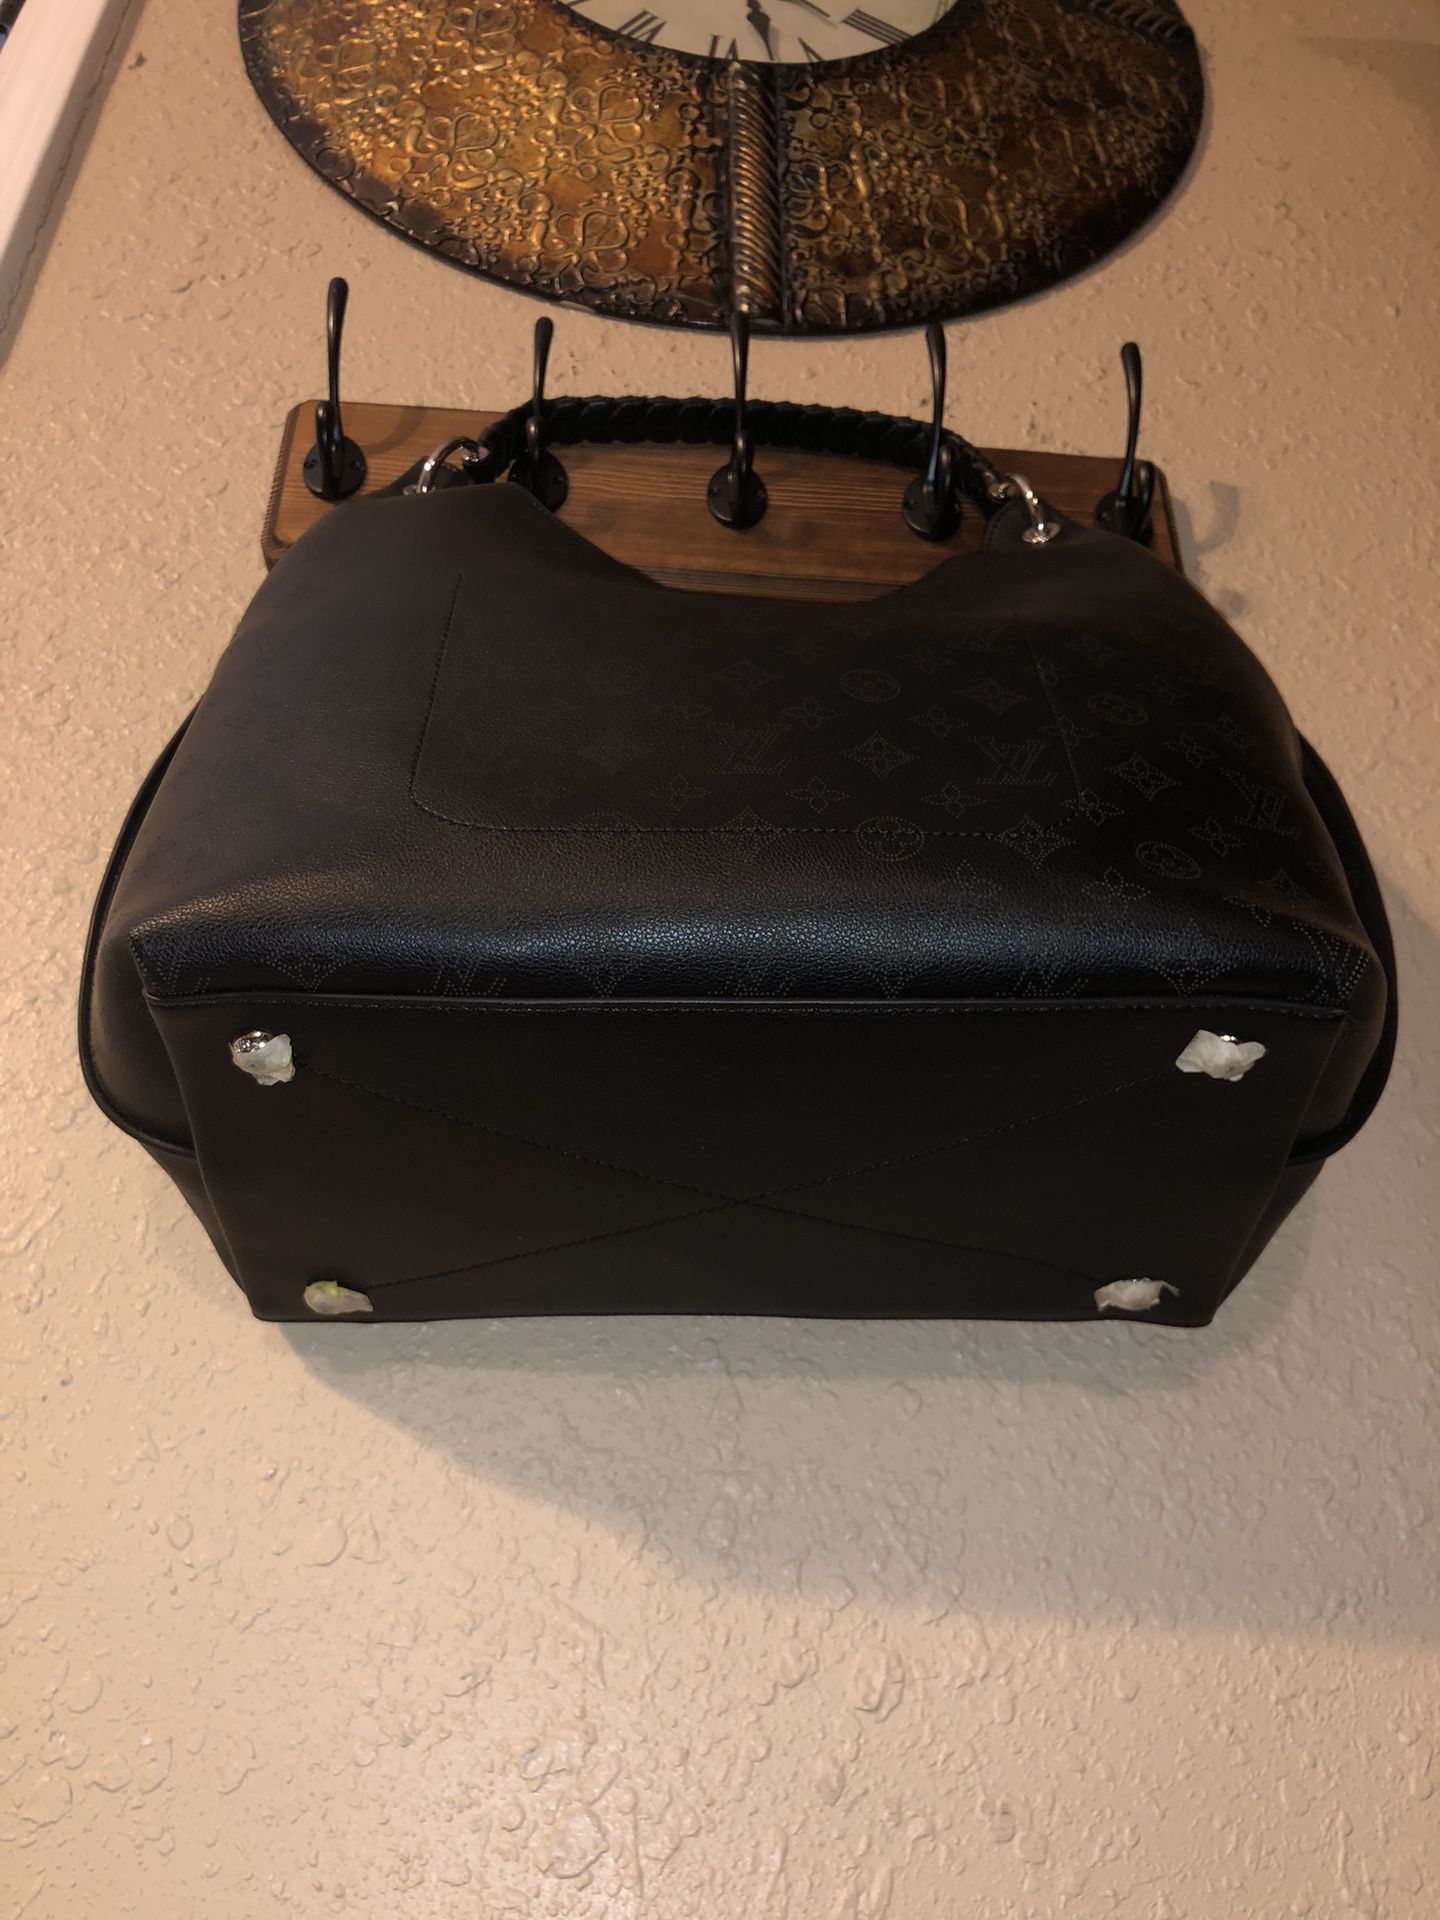 Carmel Hobo Bag for Sale in Gilroy, CA - OfferUp